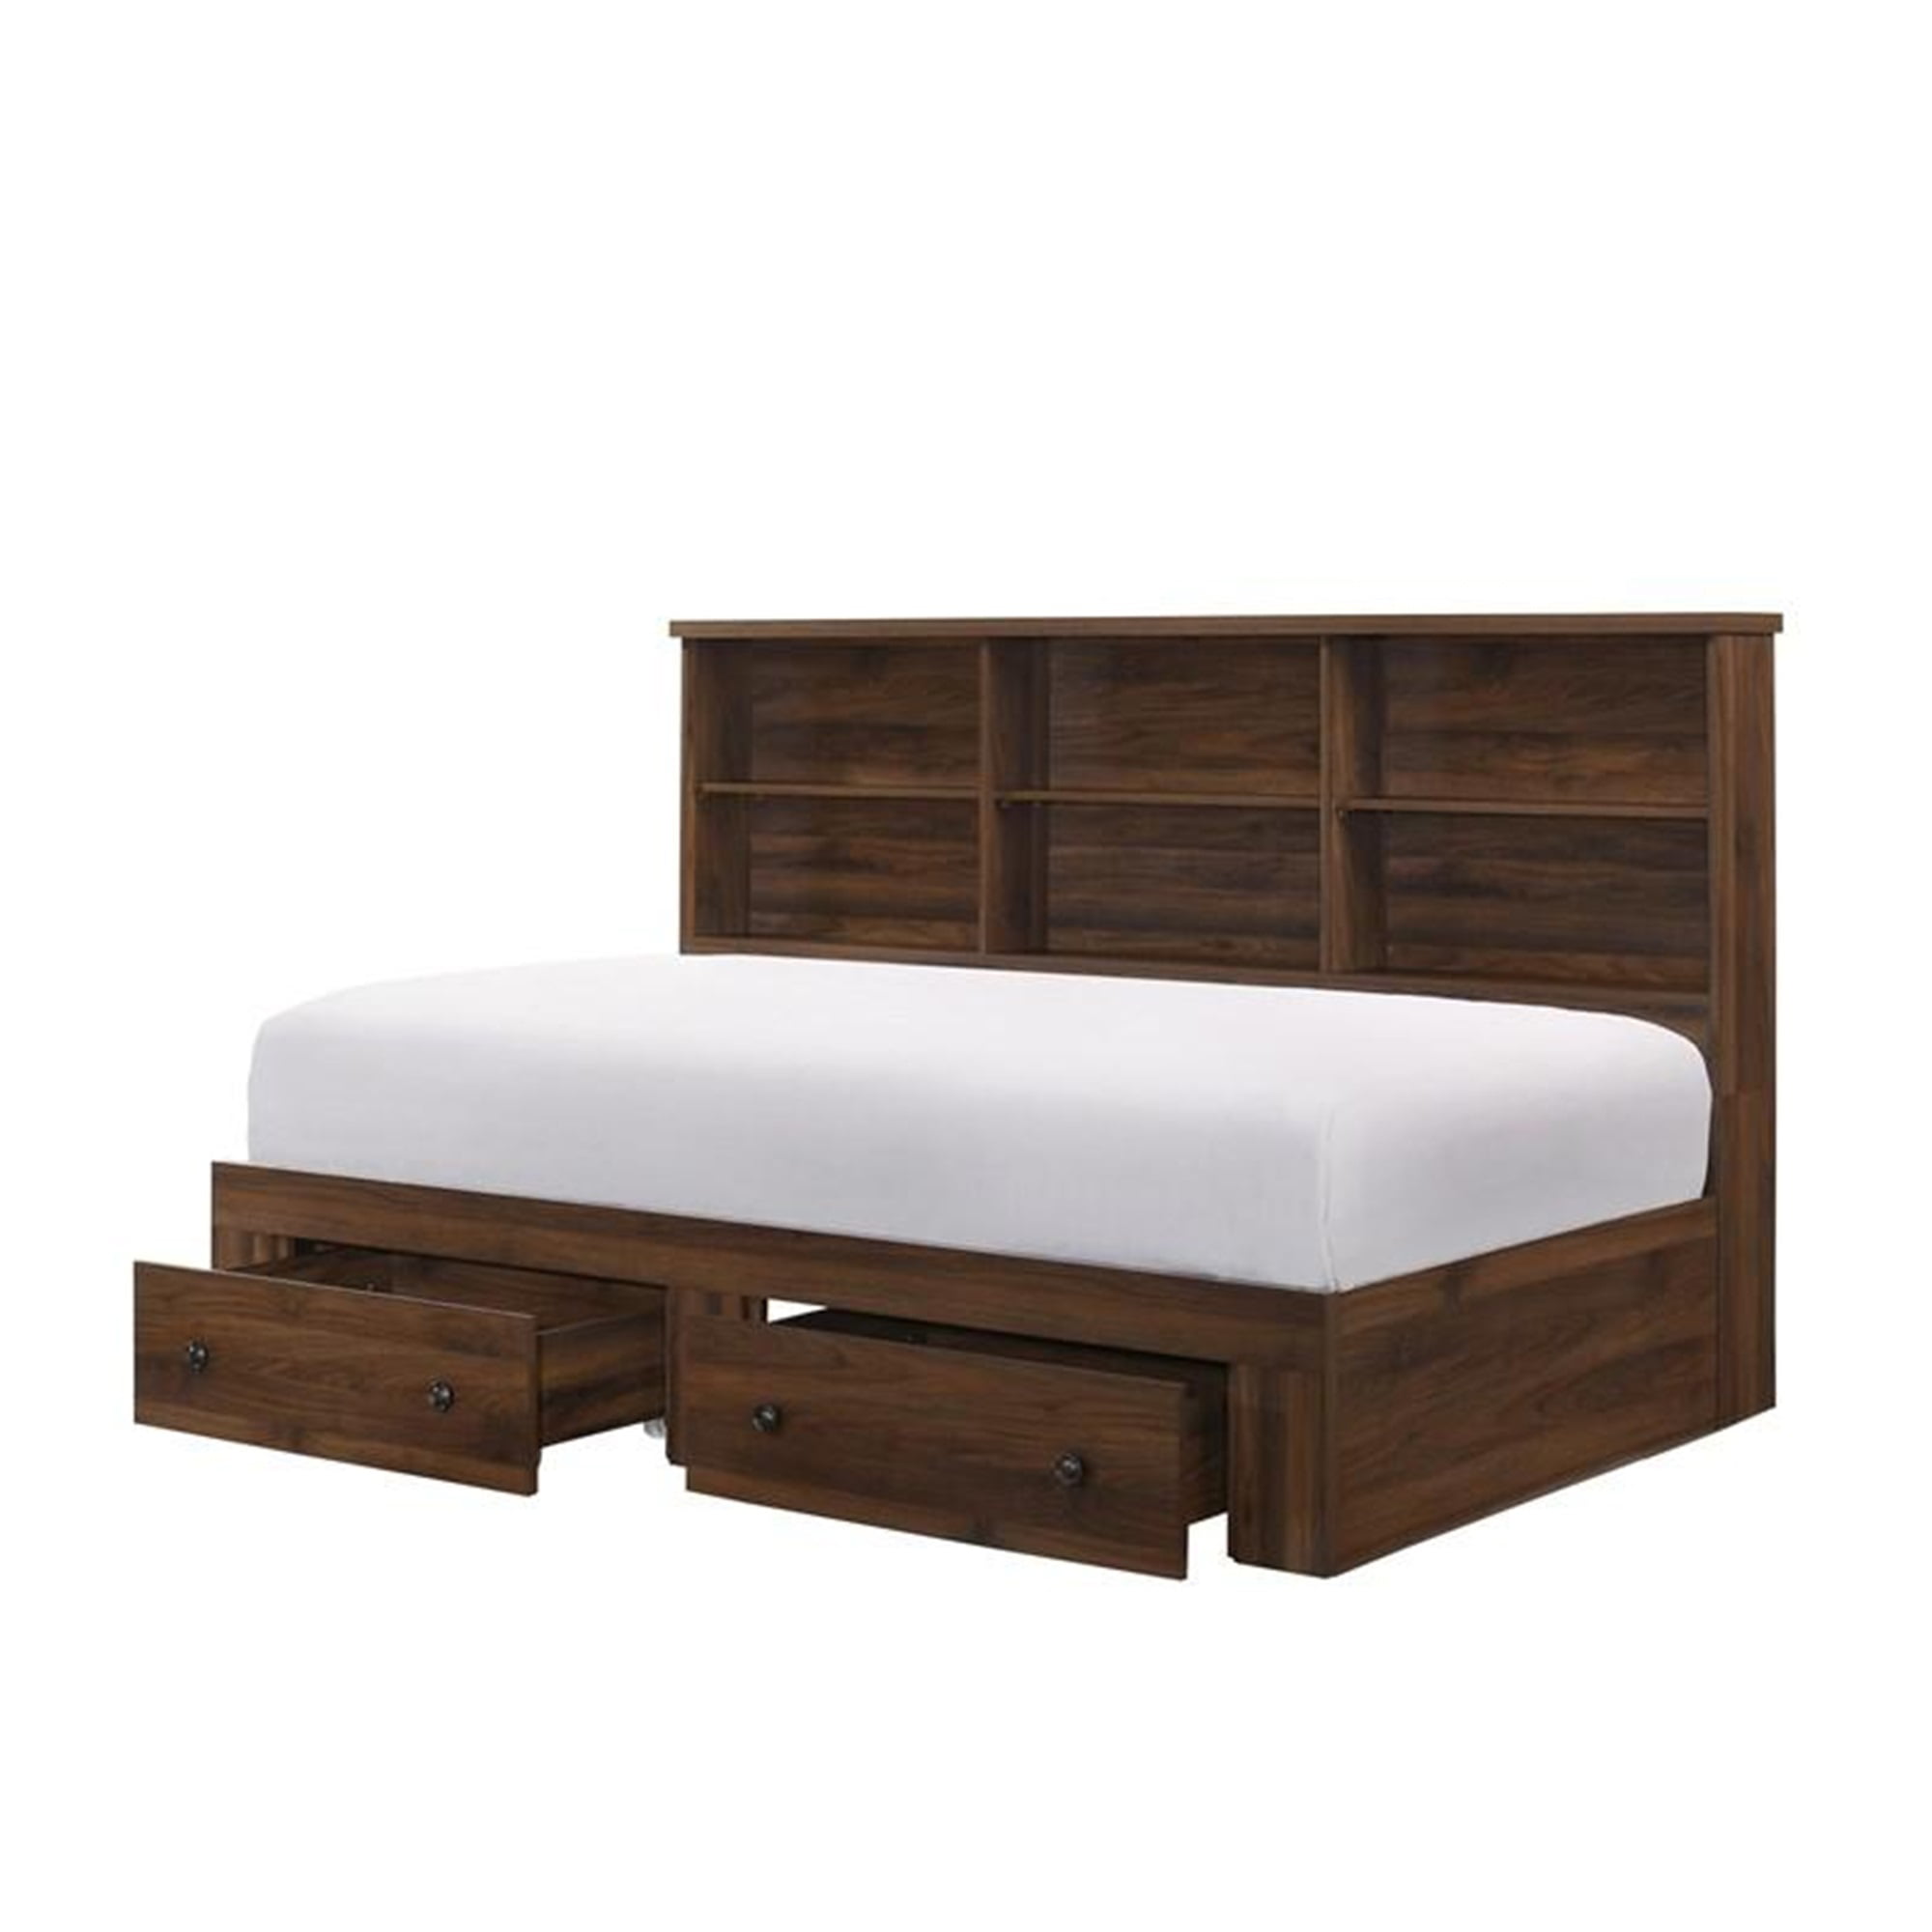 Rustic Style Wooden California King Size Bed With Bookcase Headboard ...